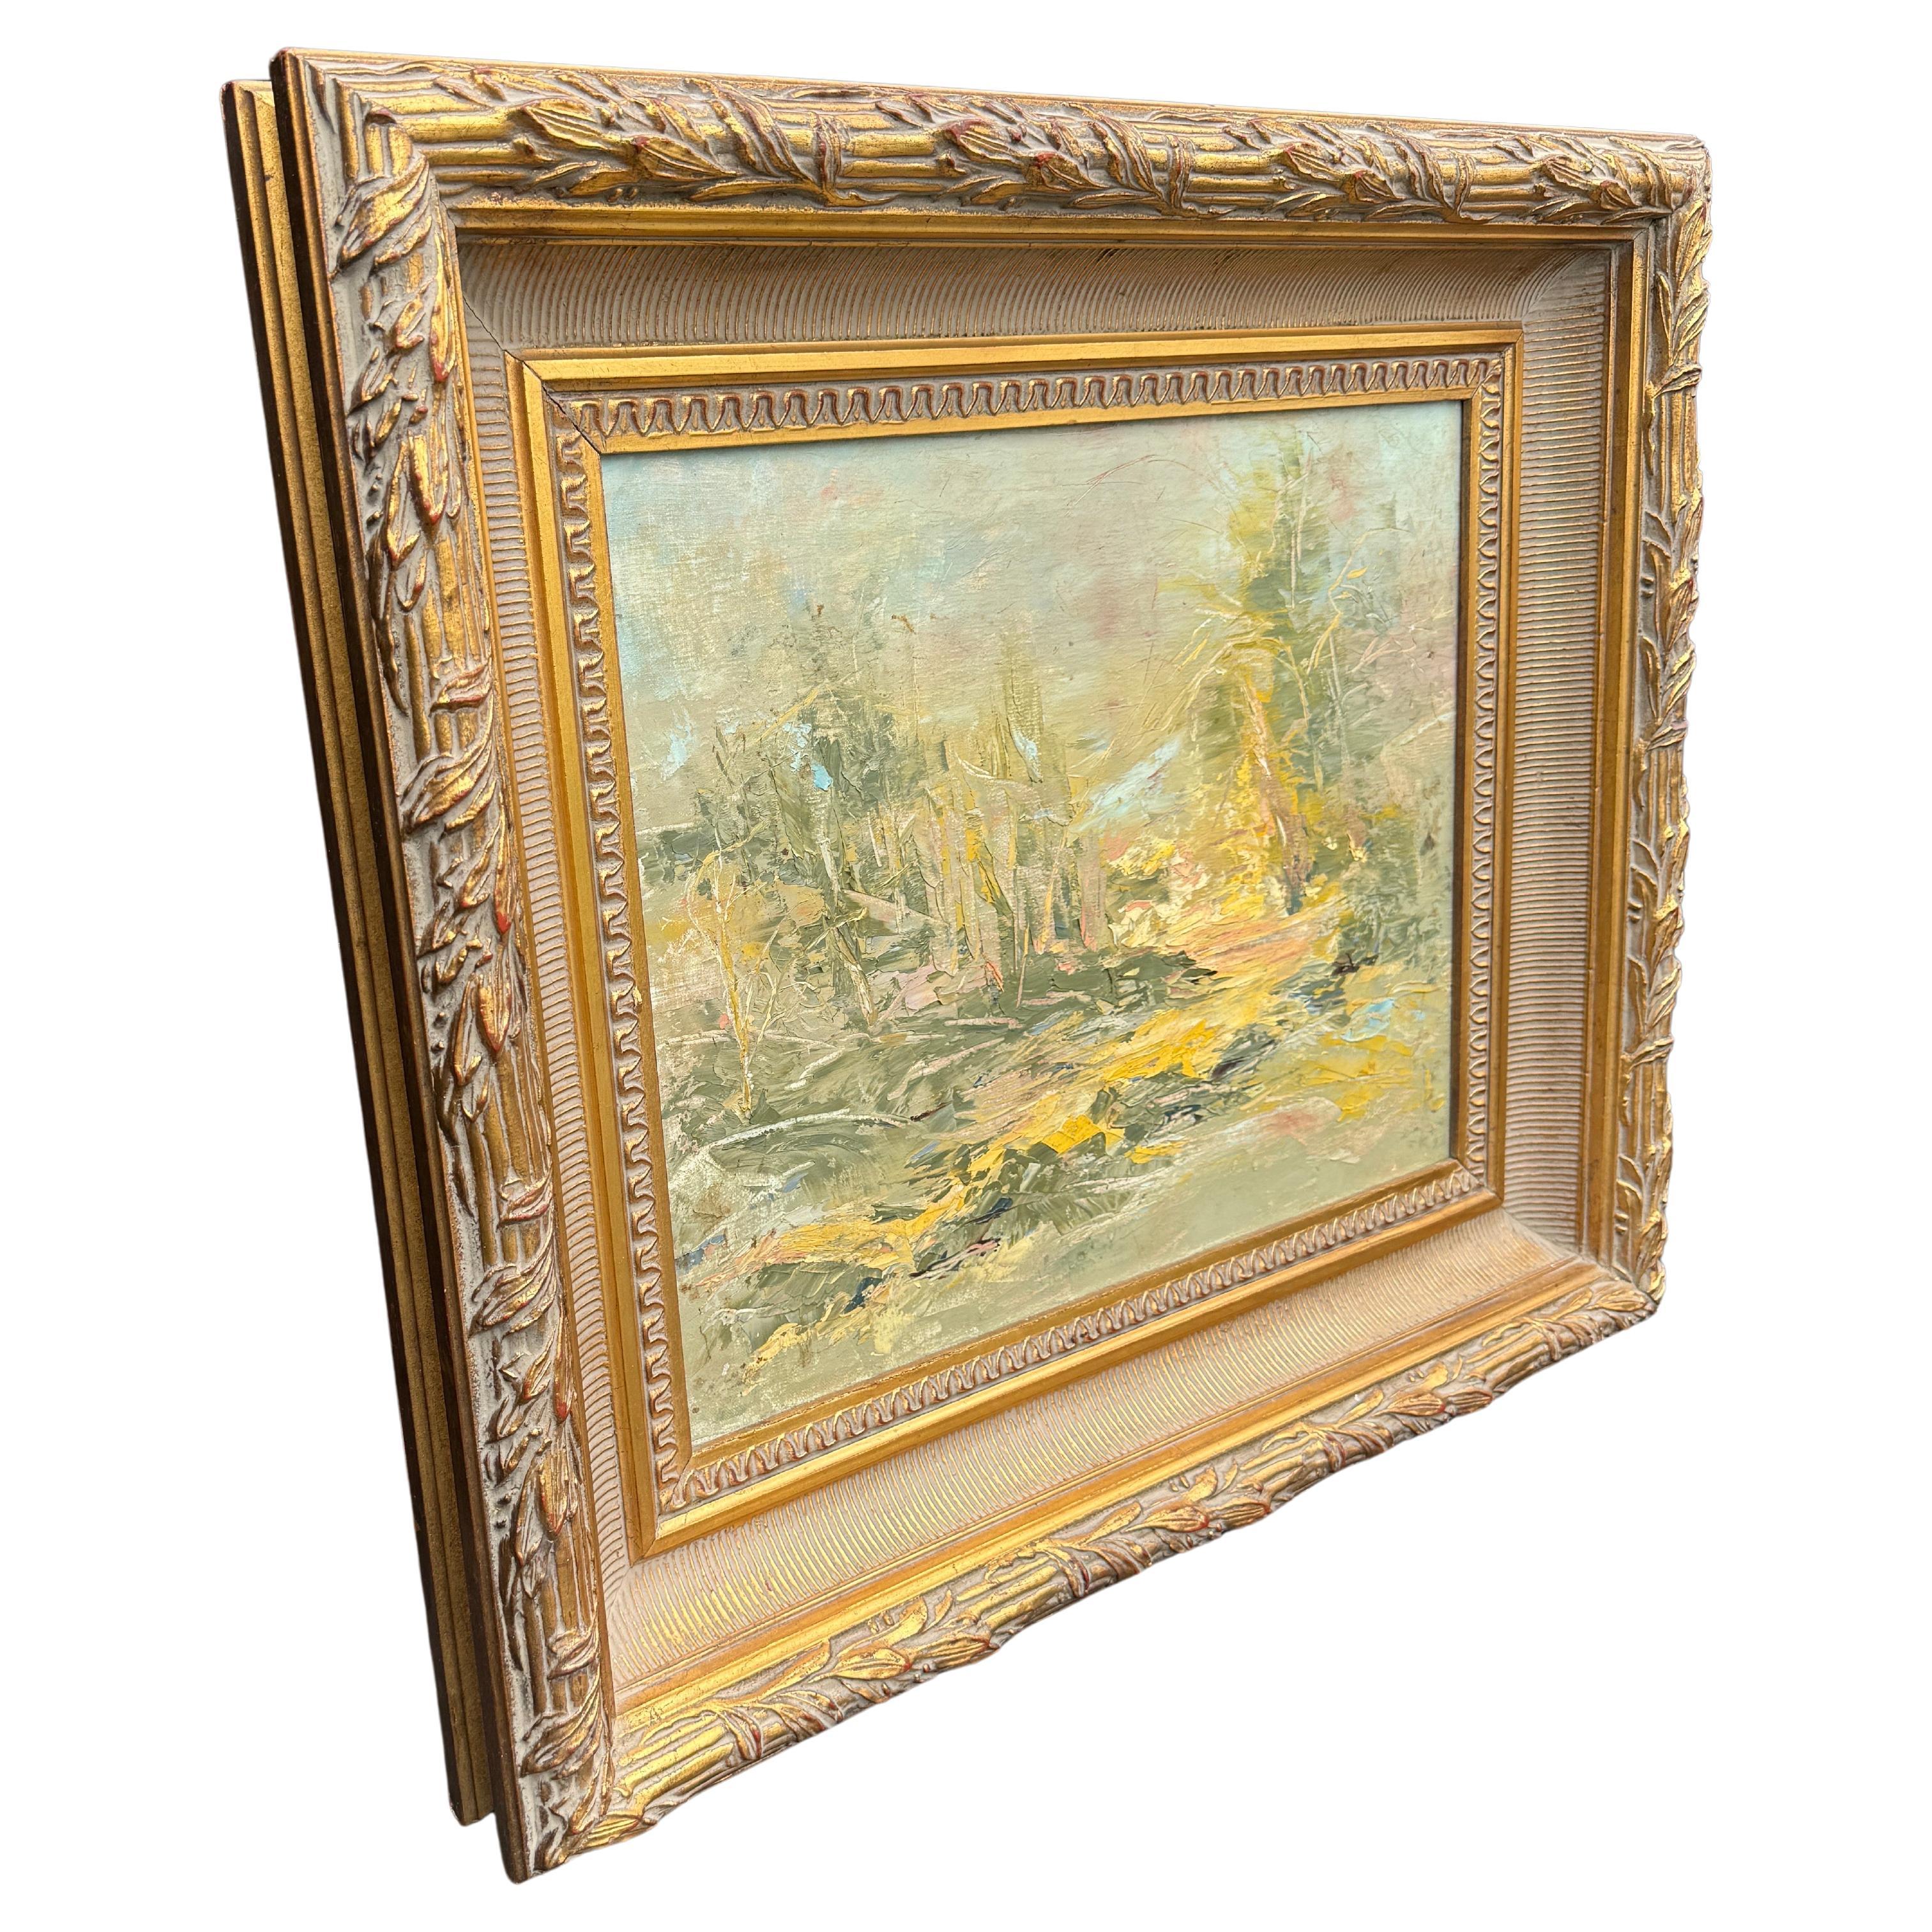 Impressionist Abstract Oil on Canvas Painting Gold Framed

A very serene abstract, painted in oil. Seemingly simple and relaxed scene yet very effective in composition. Sweeping brushstrokes imbue the work with a soothing quality, and the use of